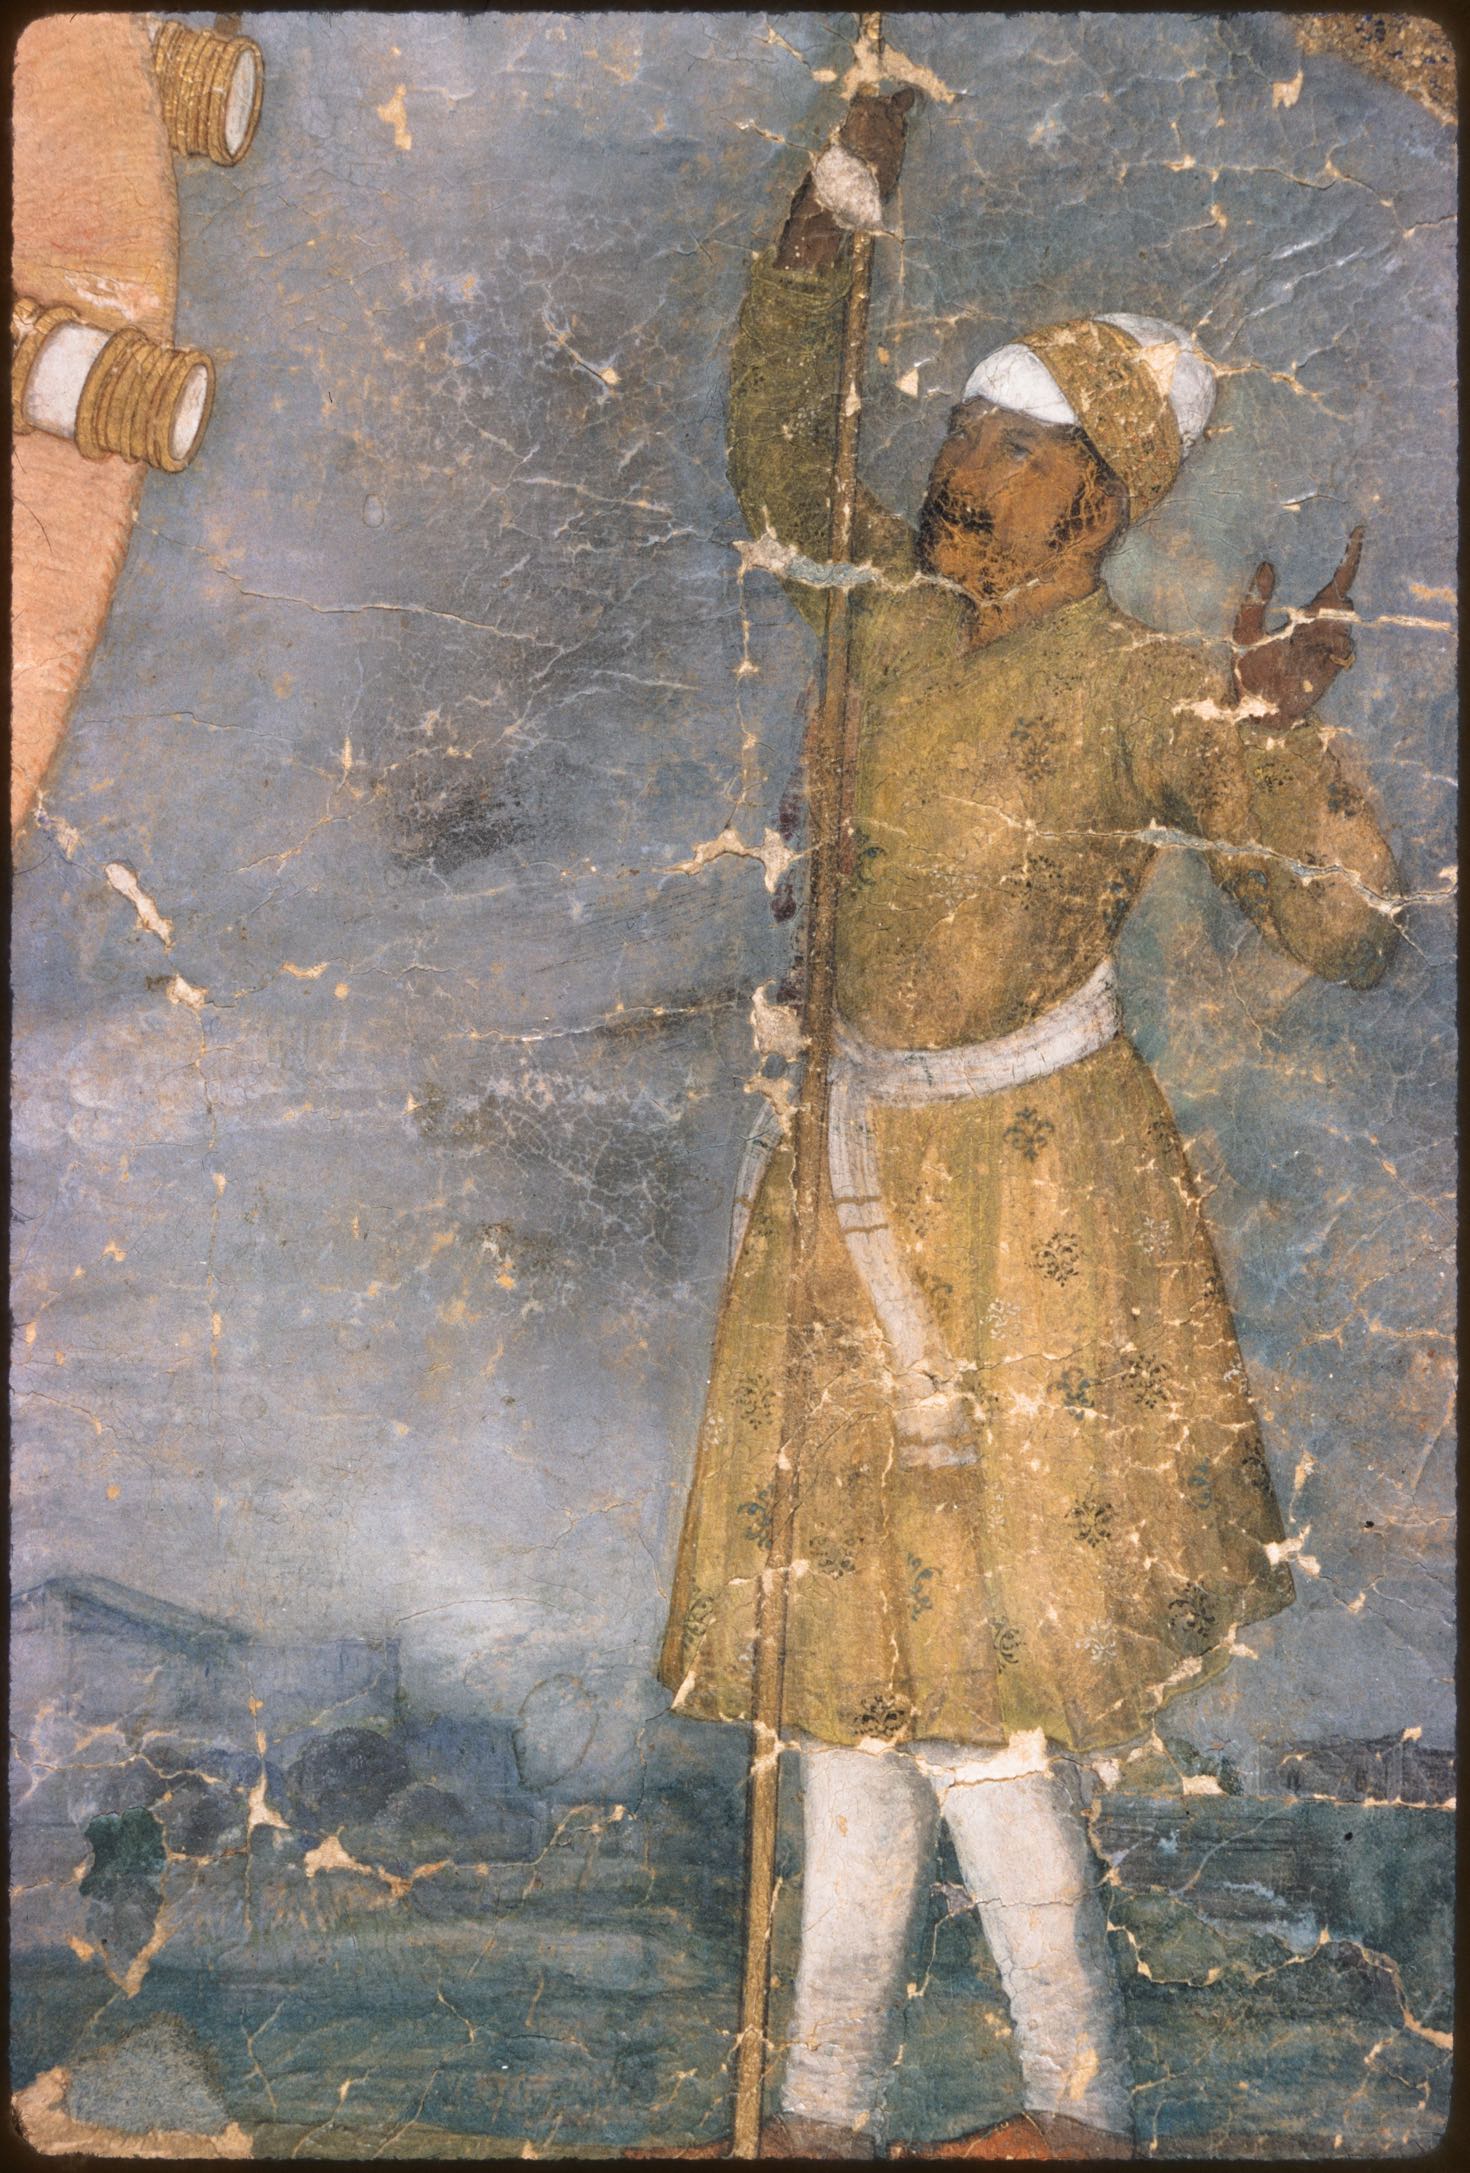 Detail: elephant handler, from Shah Jahan's pink elephant ridden by Prince Dara Shikoh, page from a royal album of Shah Jahan (Museum of Islamic Art, Qatar, MS.51.2007)